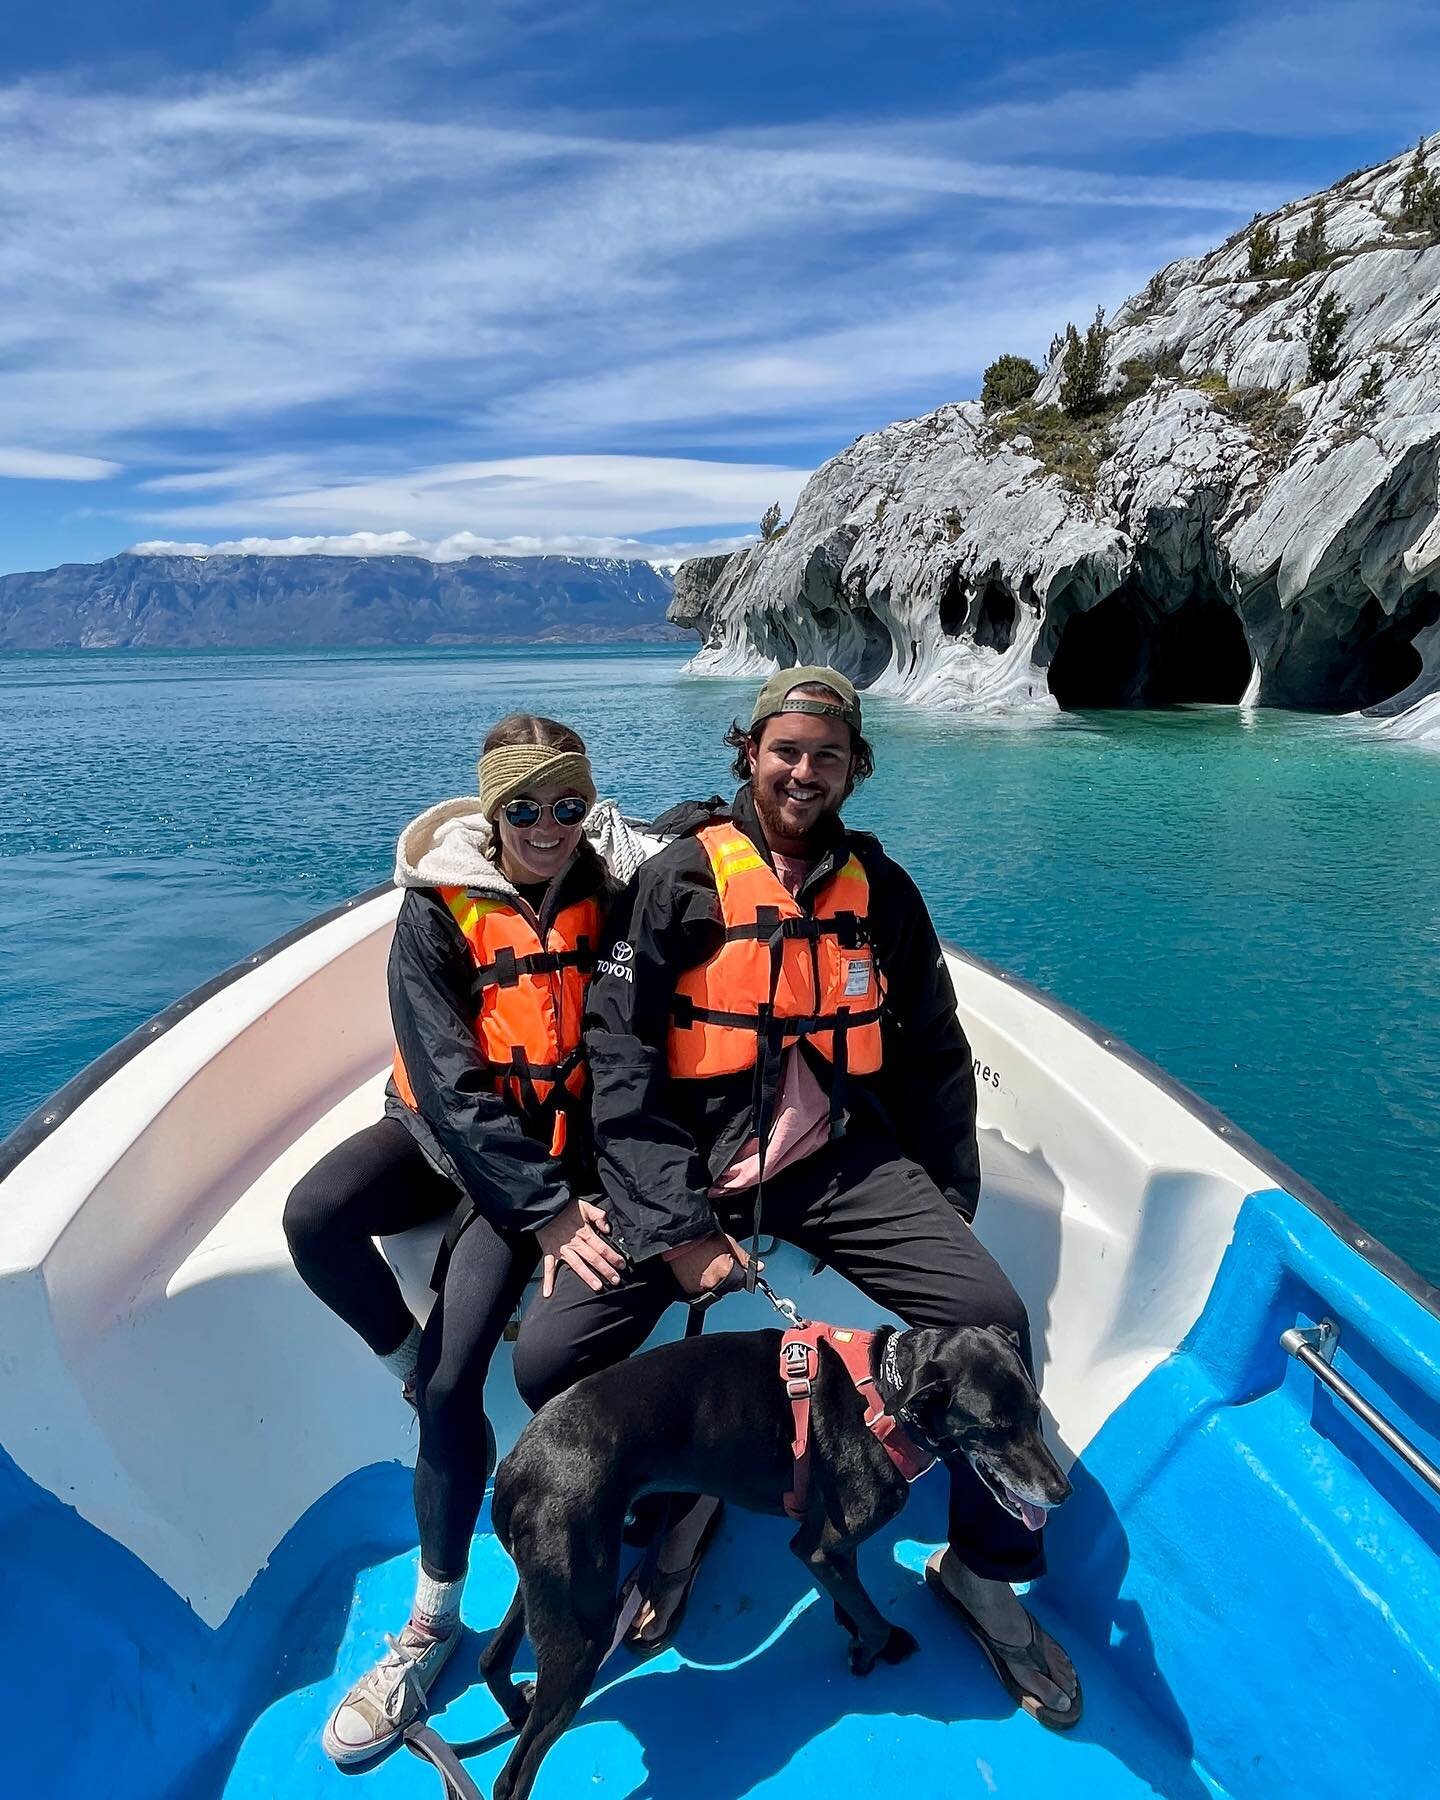 Marble Caves, Patagonia ✨ The guides let us bring Cooper! We crossed the border from Argentina to Chile for our third time to explore Lake Buenos Aires, San Rafael Park, Bah&iacute;a Expladores and Patagonia National Park. We had three days of very l